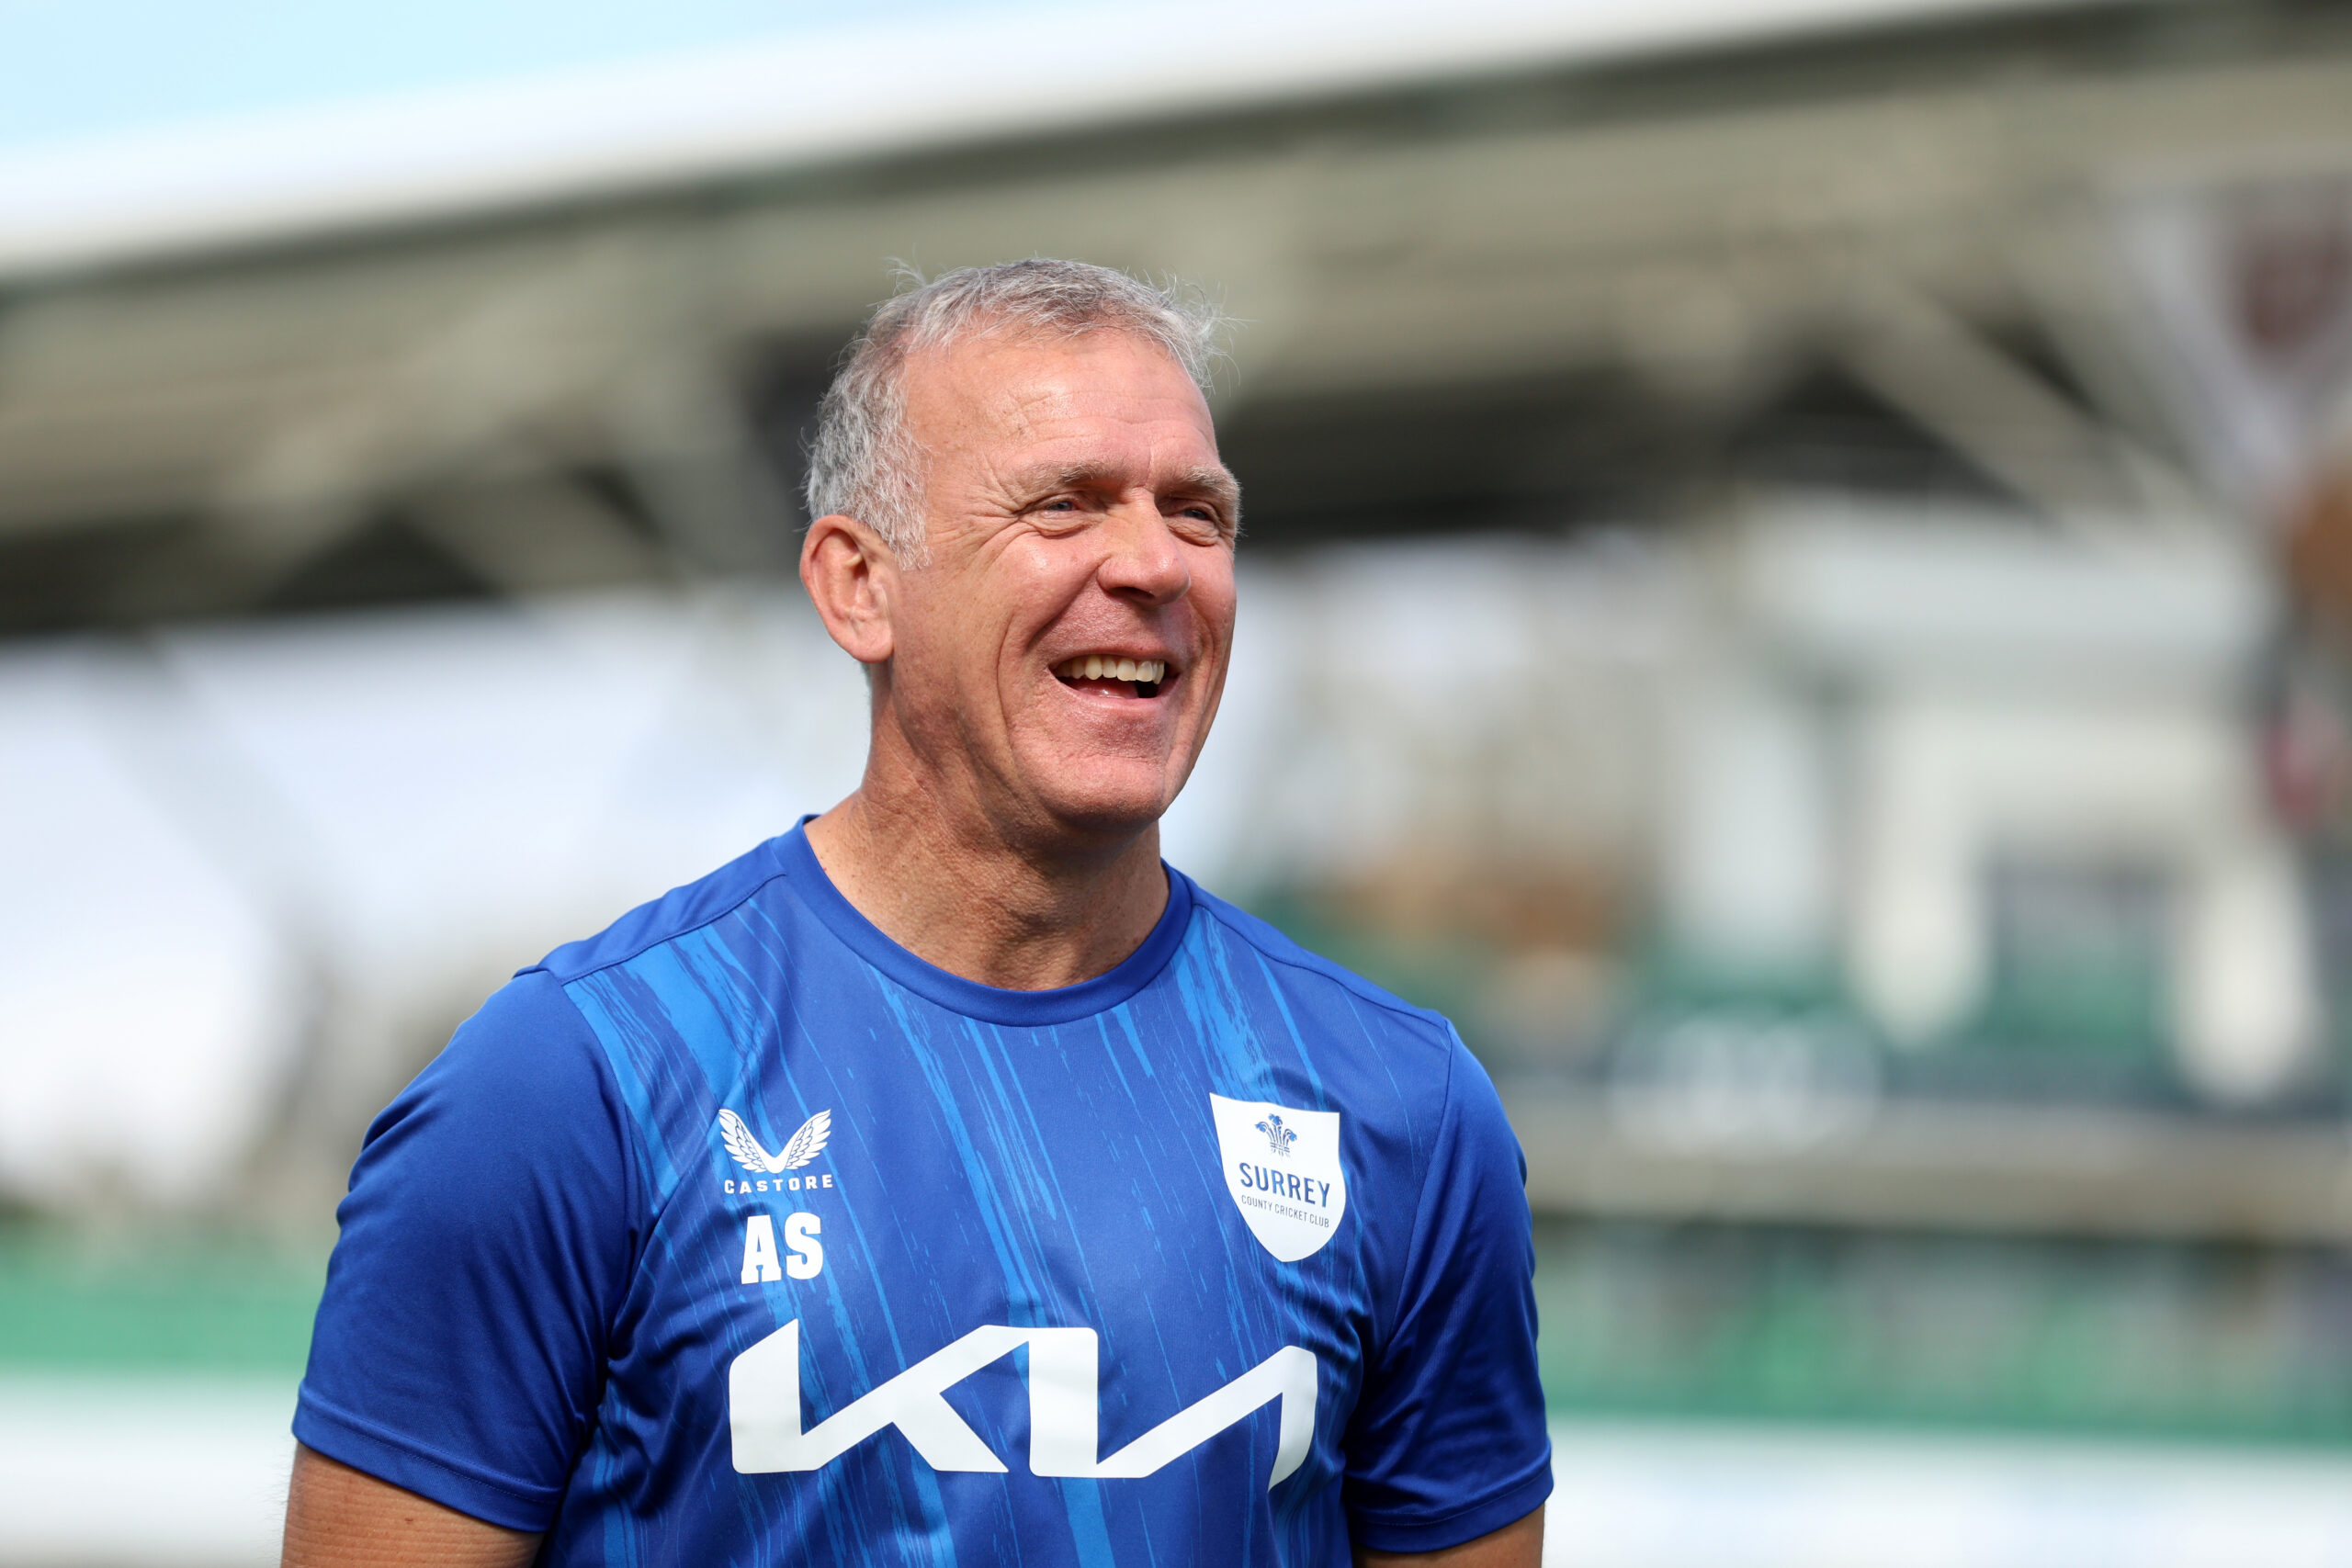 Alec Stewart announces decision to step down from role at Surrey